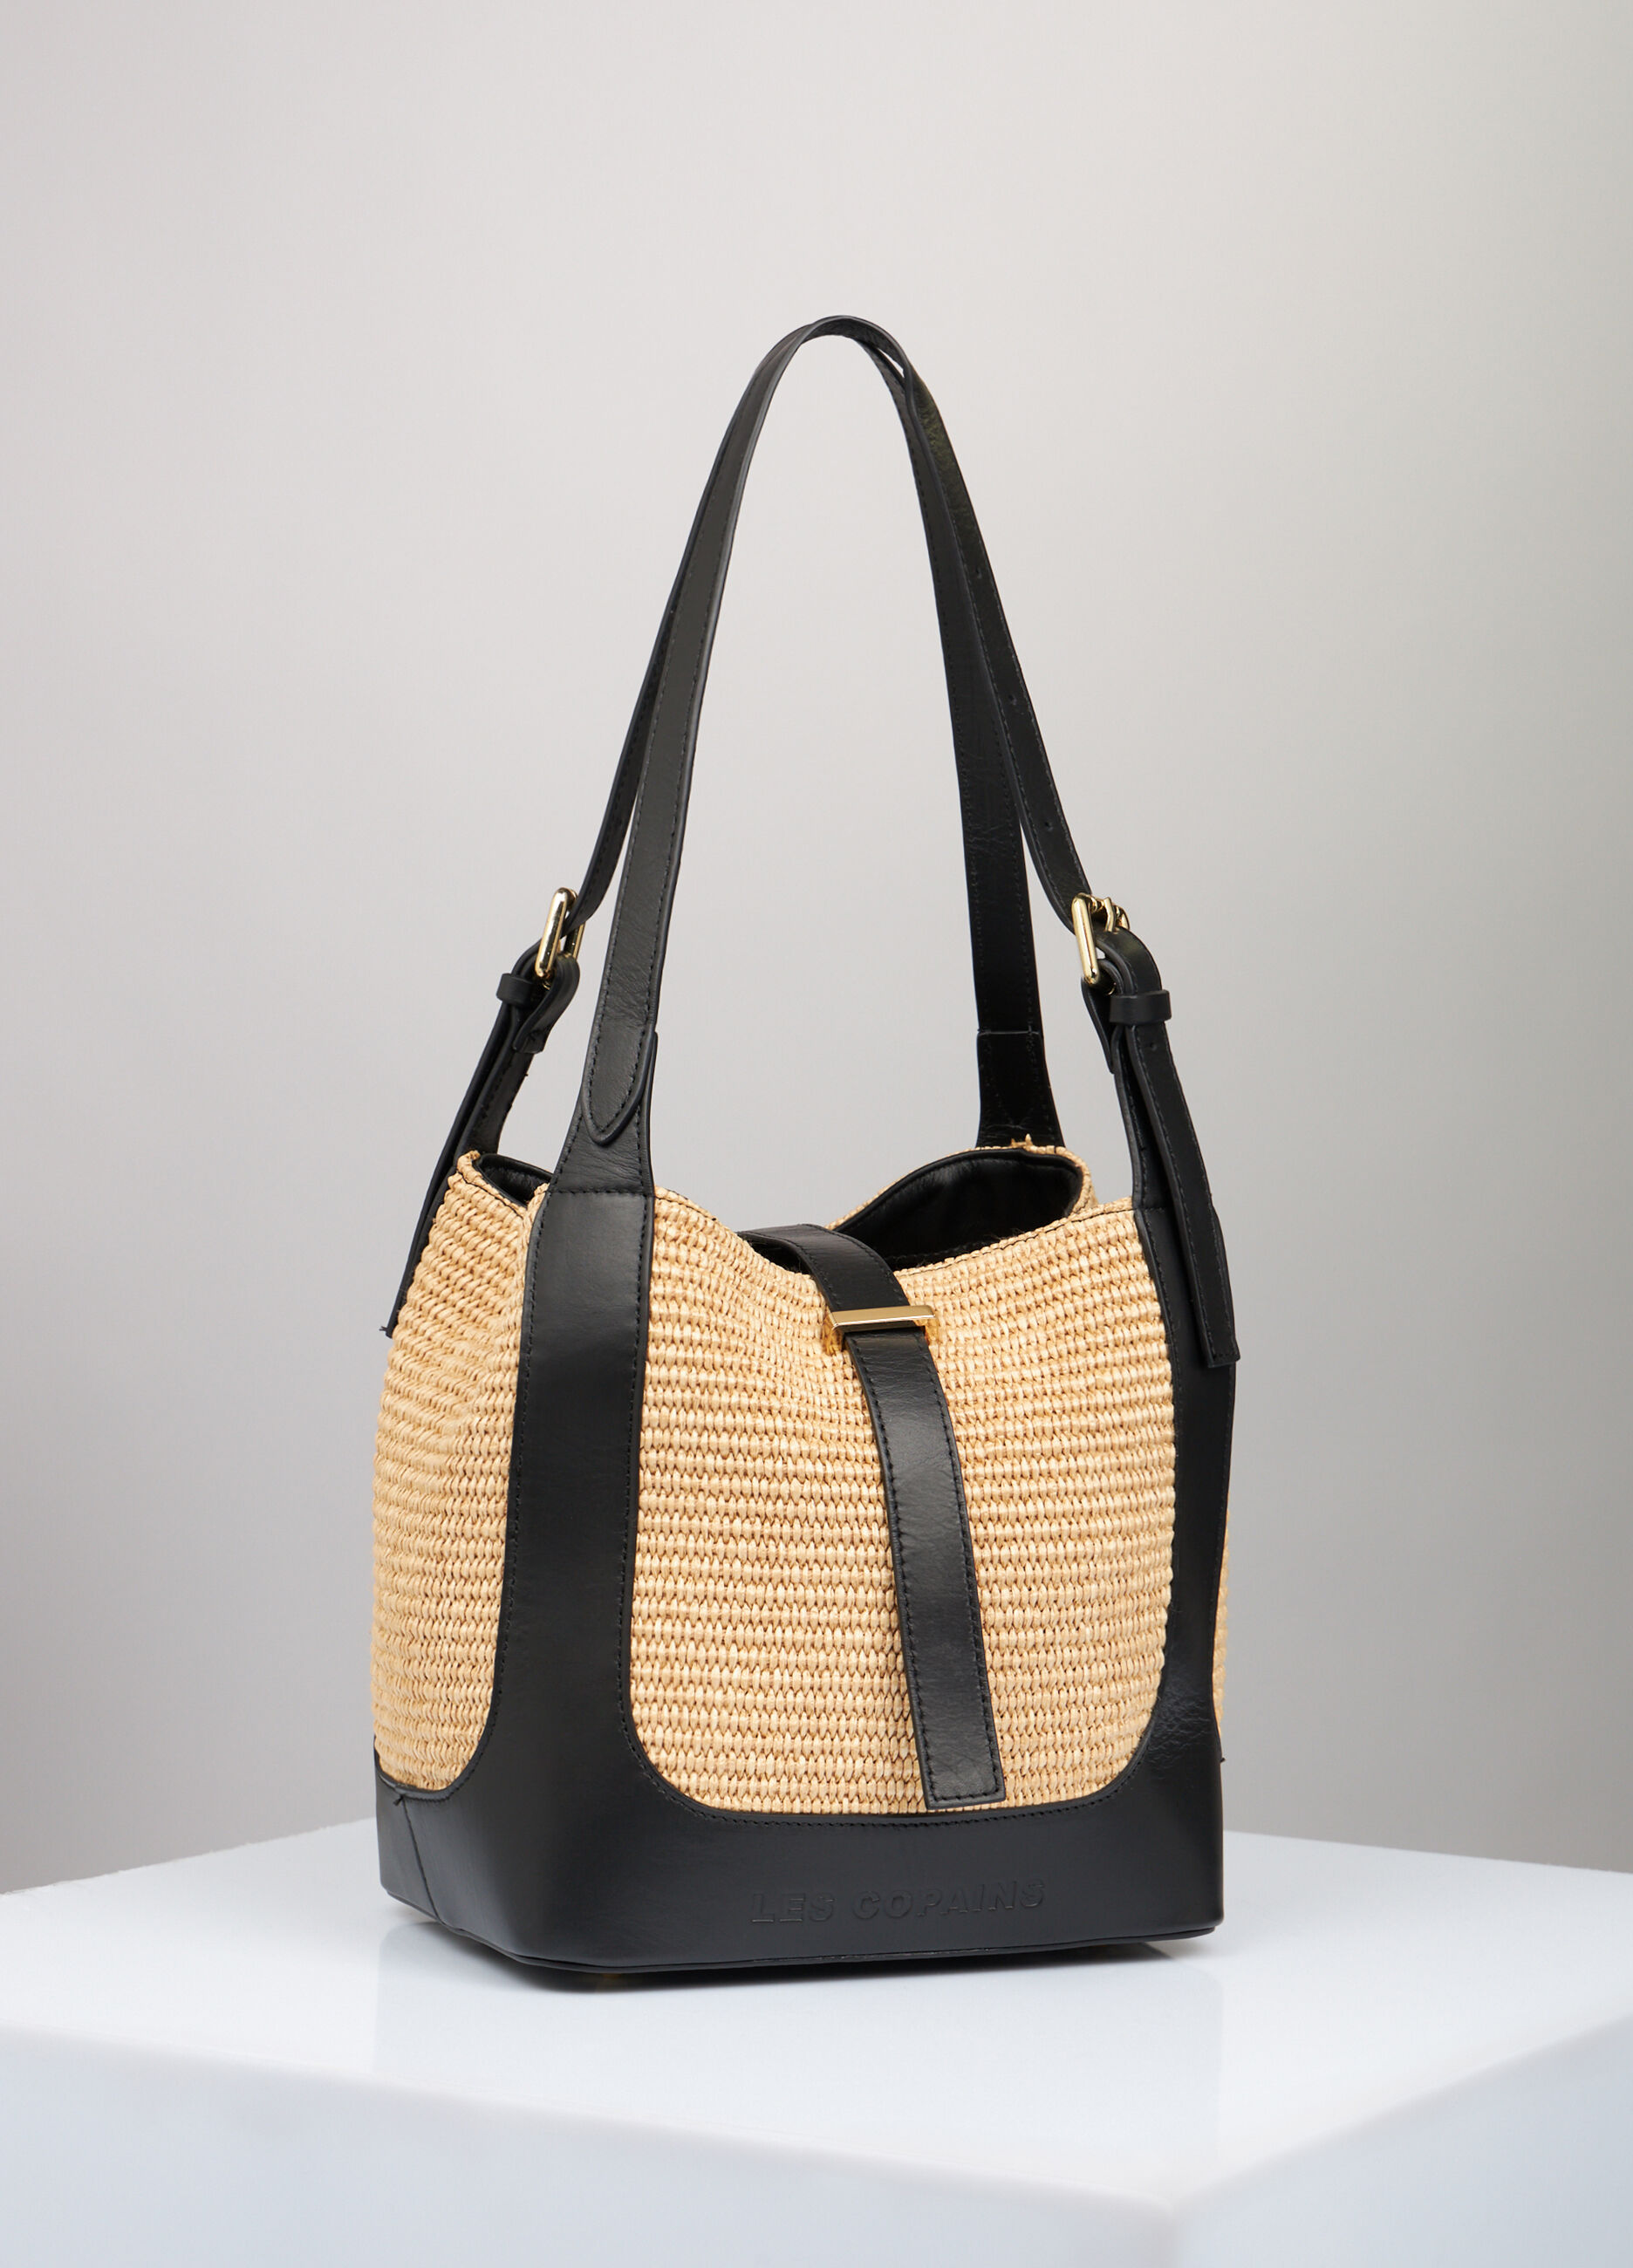 Bag in real leather and raffia